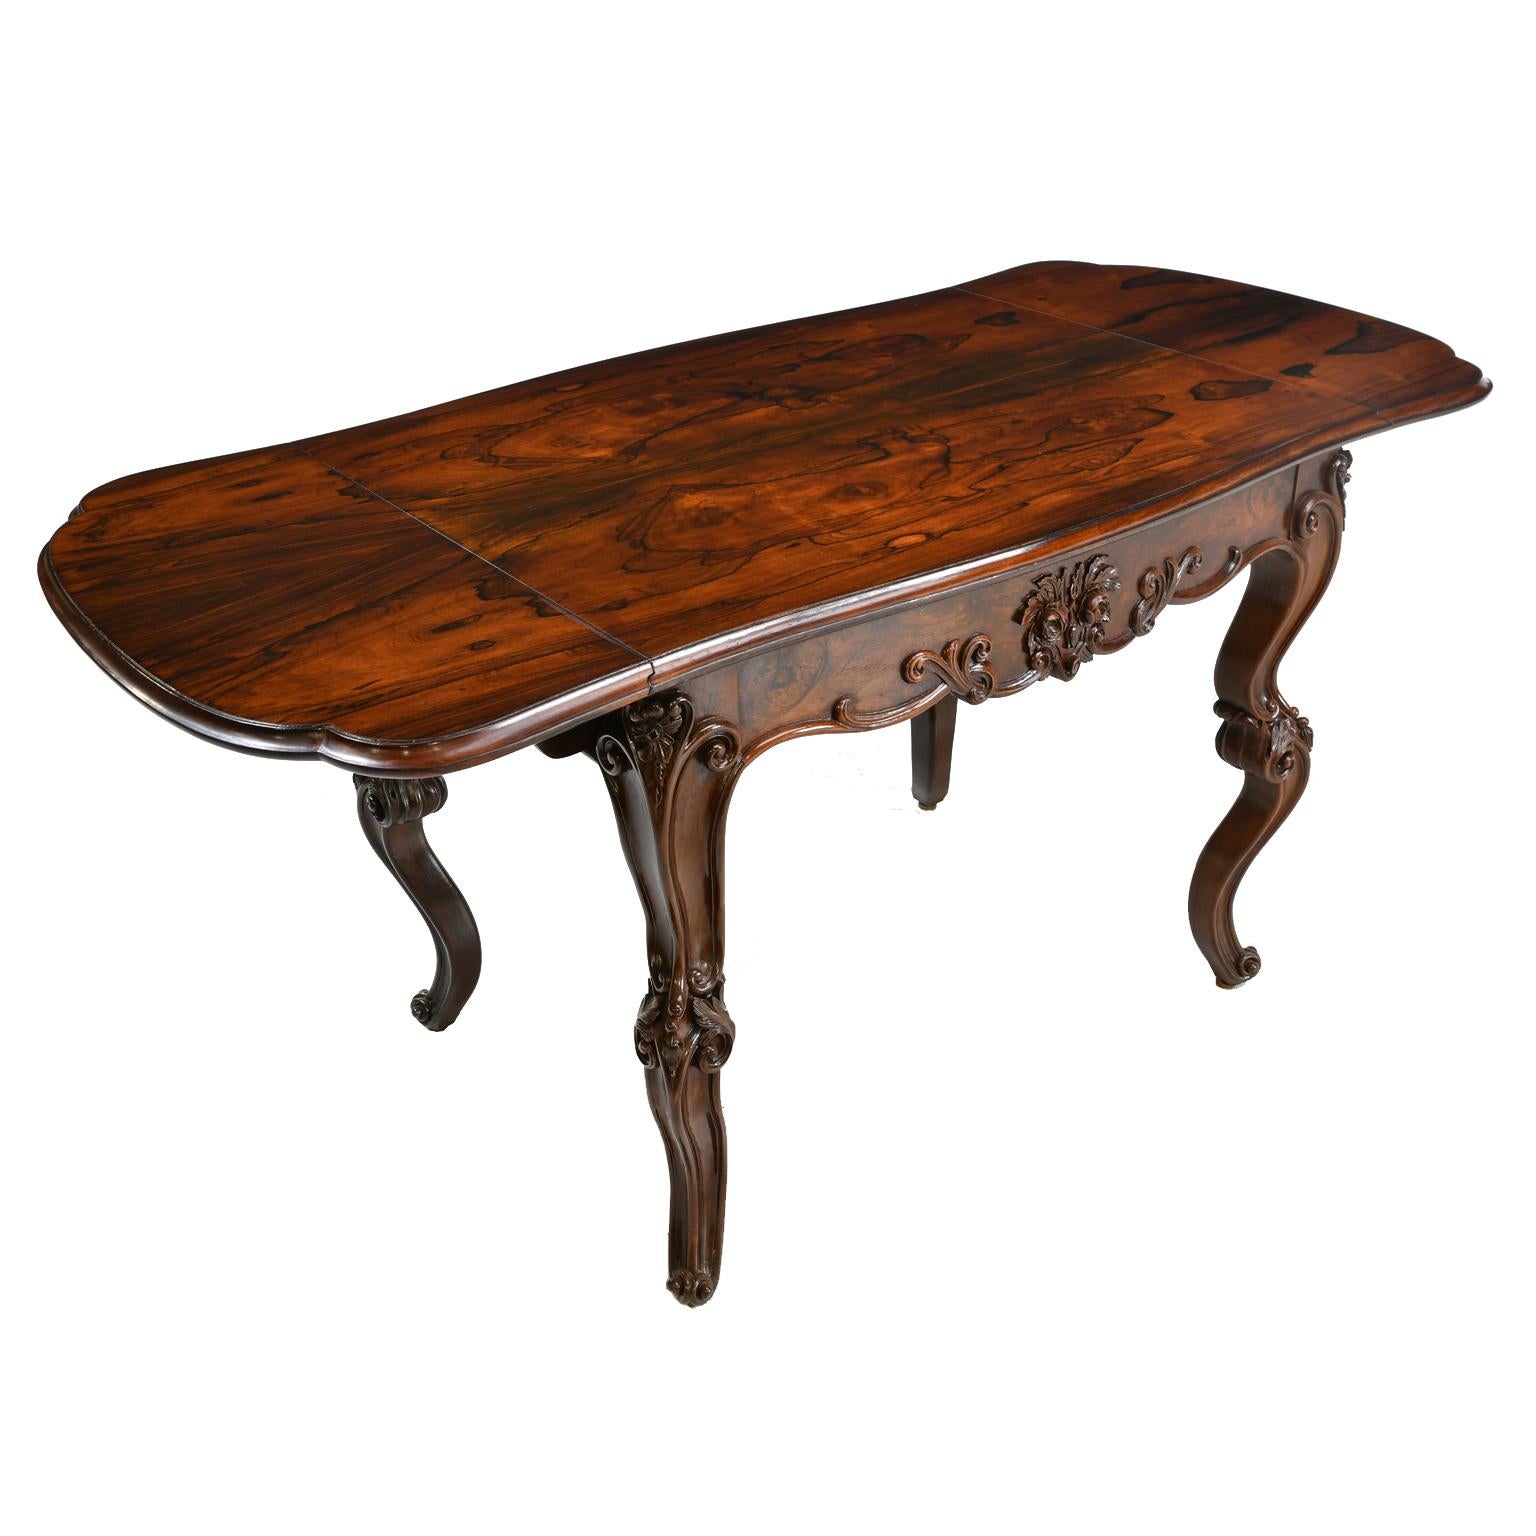 Rosewood American Rococo Revival Sofa Table or Writing Table NYC, circa 1840 For Sale 2